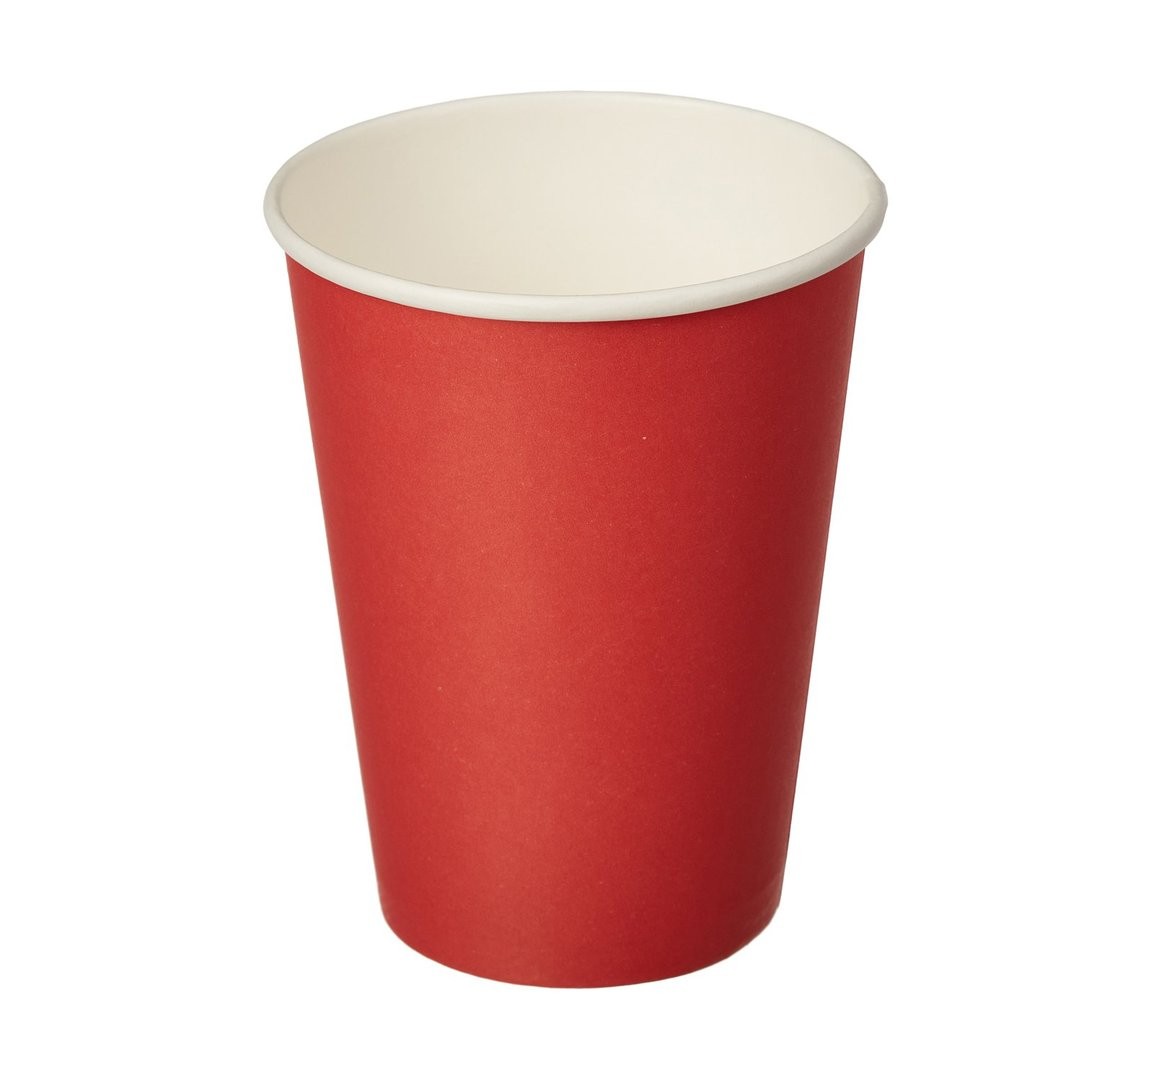 Buy Single Wall Red Paper Cup, 300 ml for Wholesale Prices in SaaMi